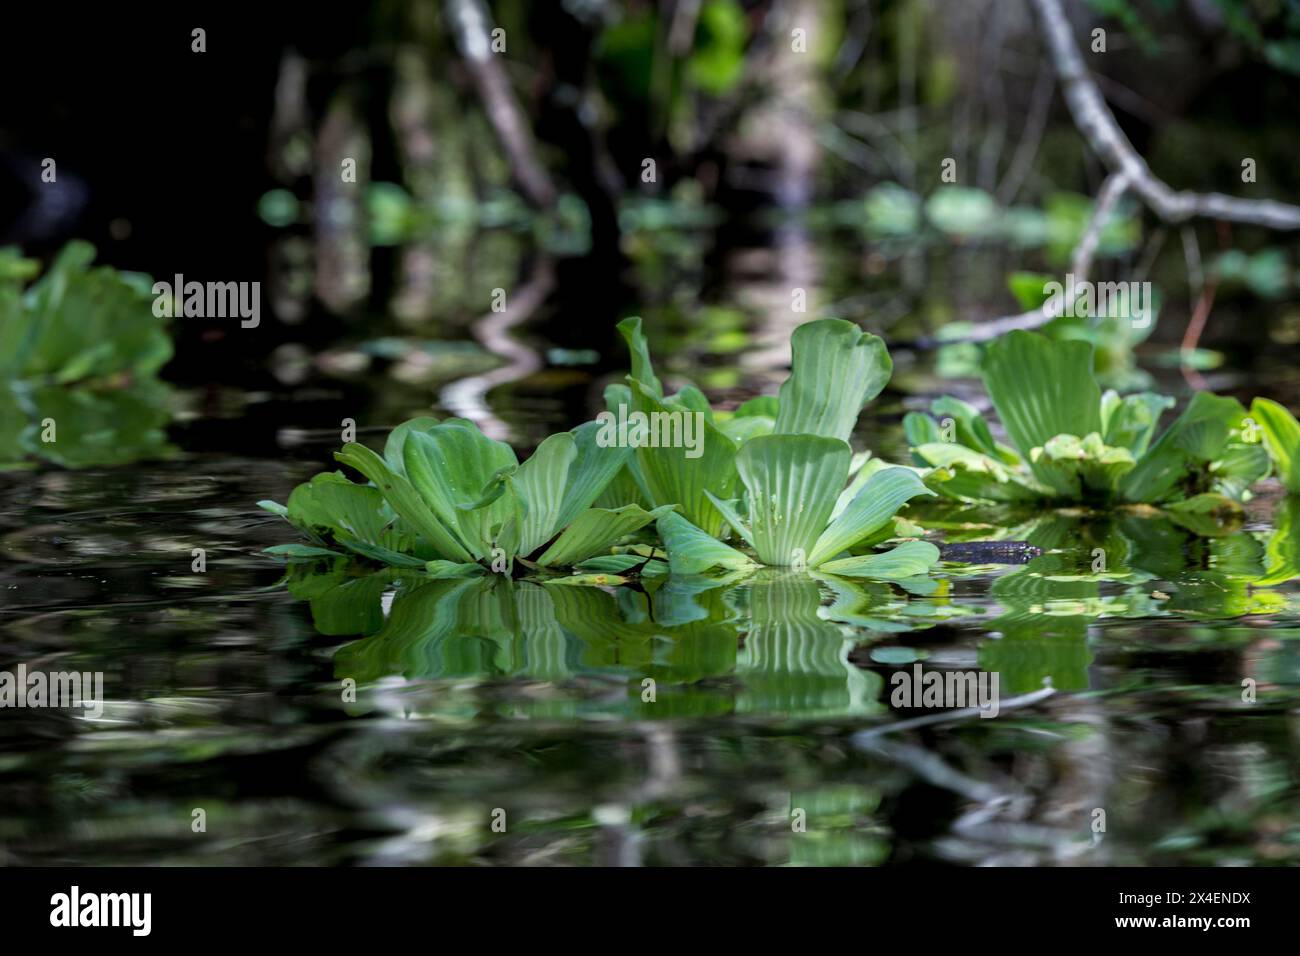 Water lettuce is a common floating plant in swamps of south Florida. Stock Photo